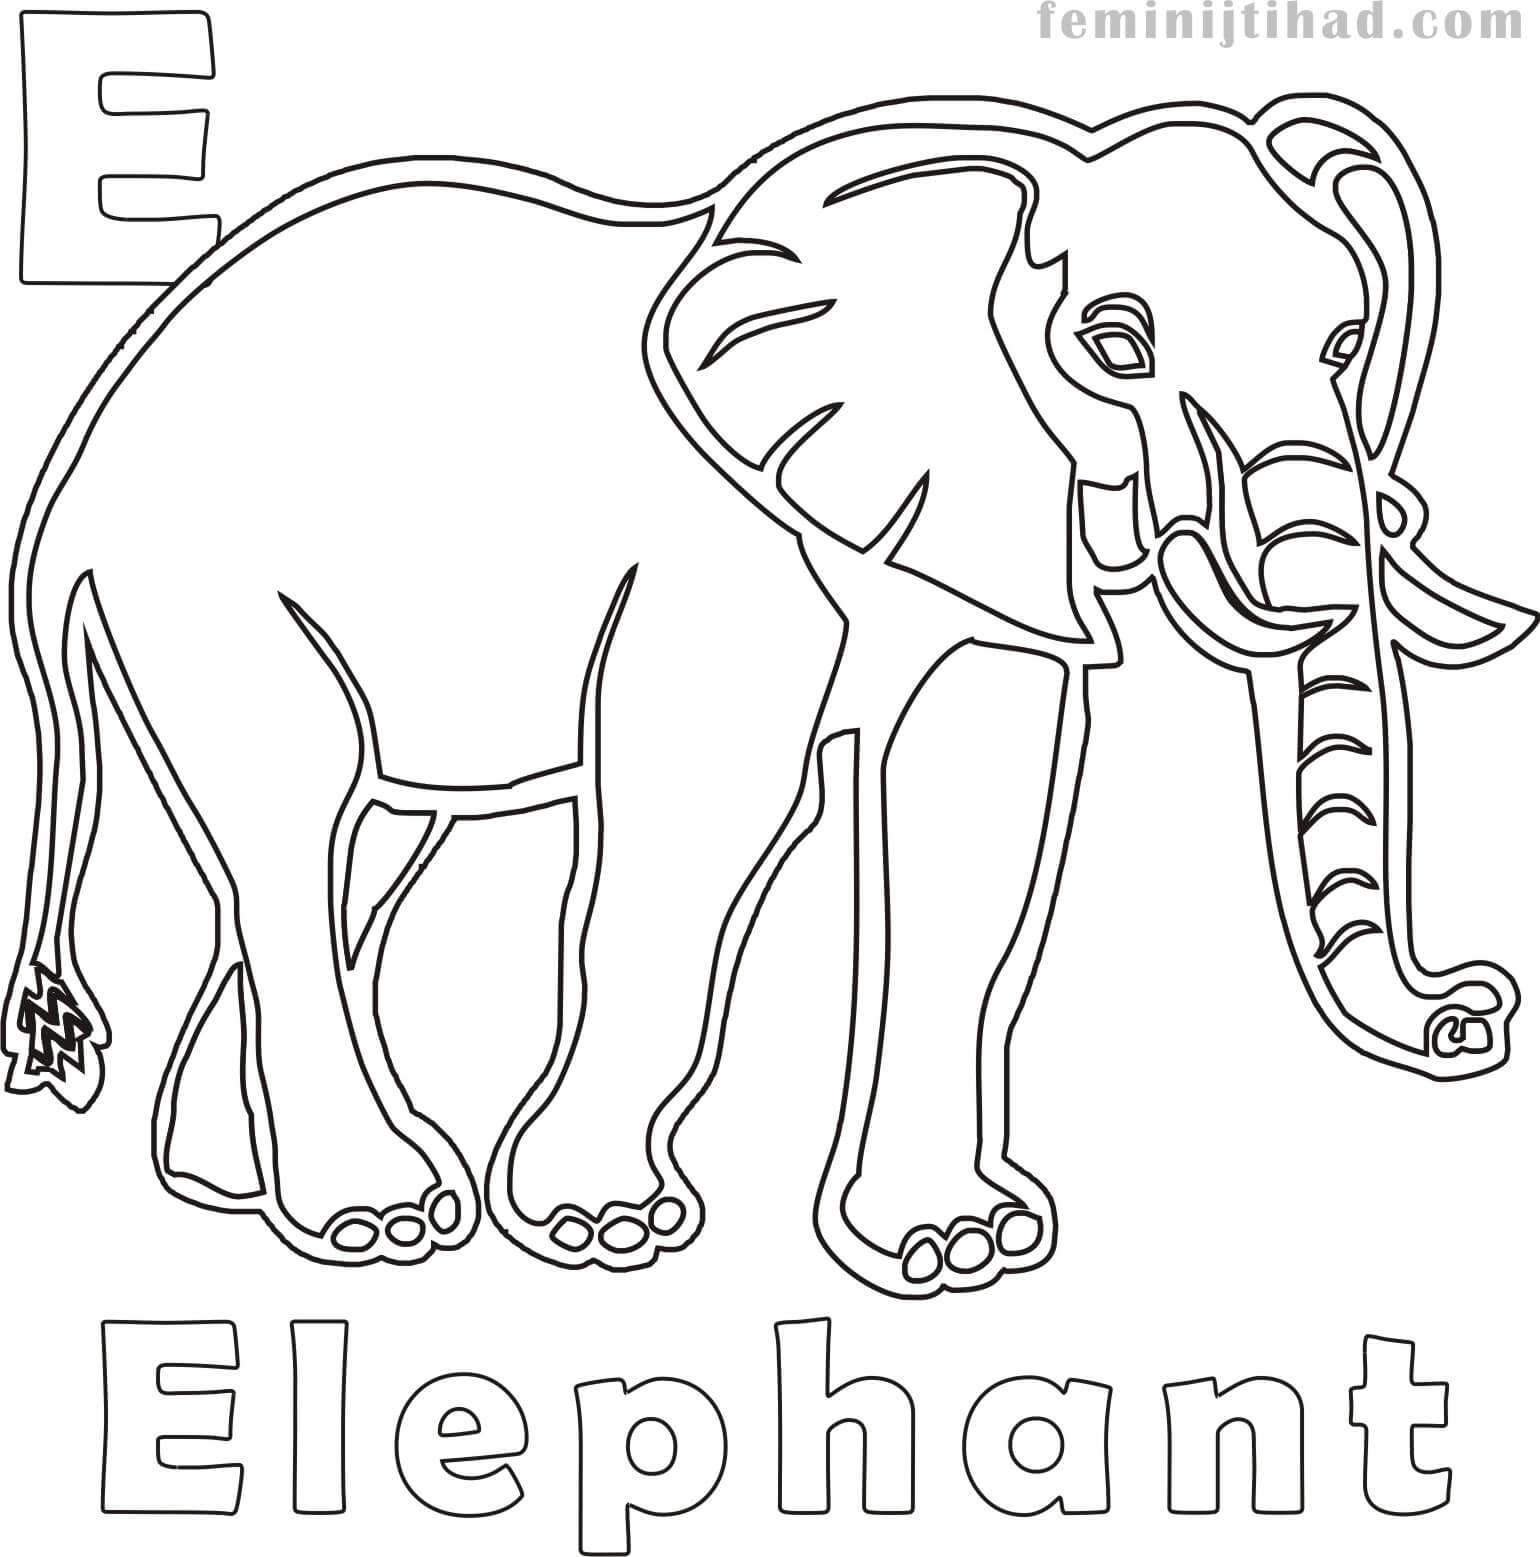 elephant drawing coloring page